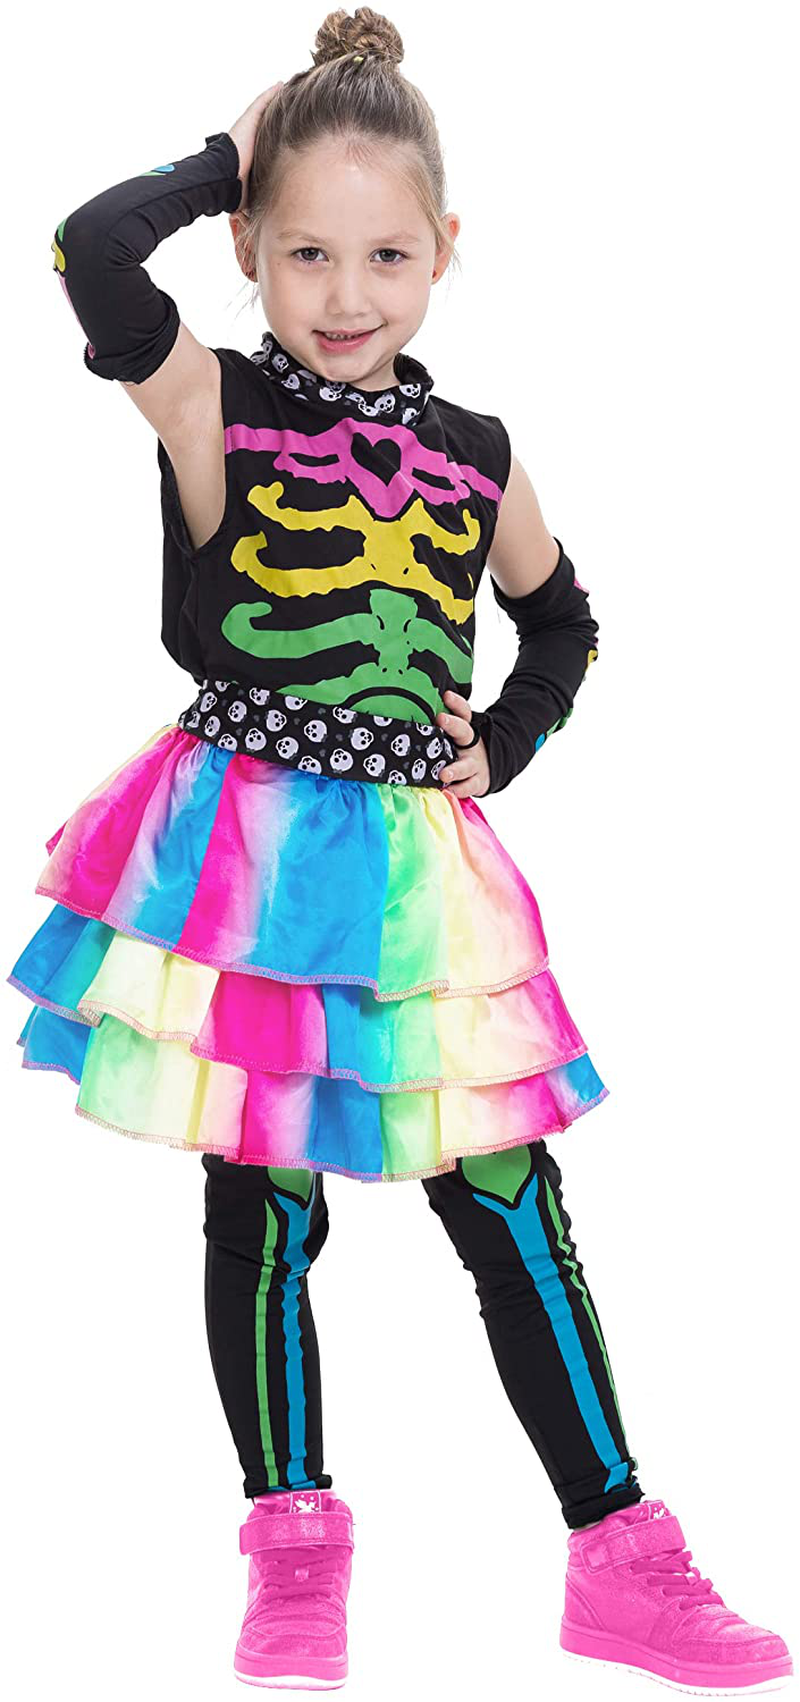 Funky Punky Bones Colorful Skeleton Deluxe Girls Costume Set with Hair Extensions for Halloween Costume Dress Up Parties. Apparel & Accessories > Costumes & Accessories > Costumes Spooktacular Creations   